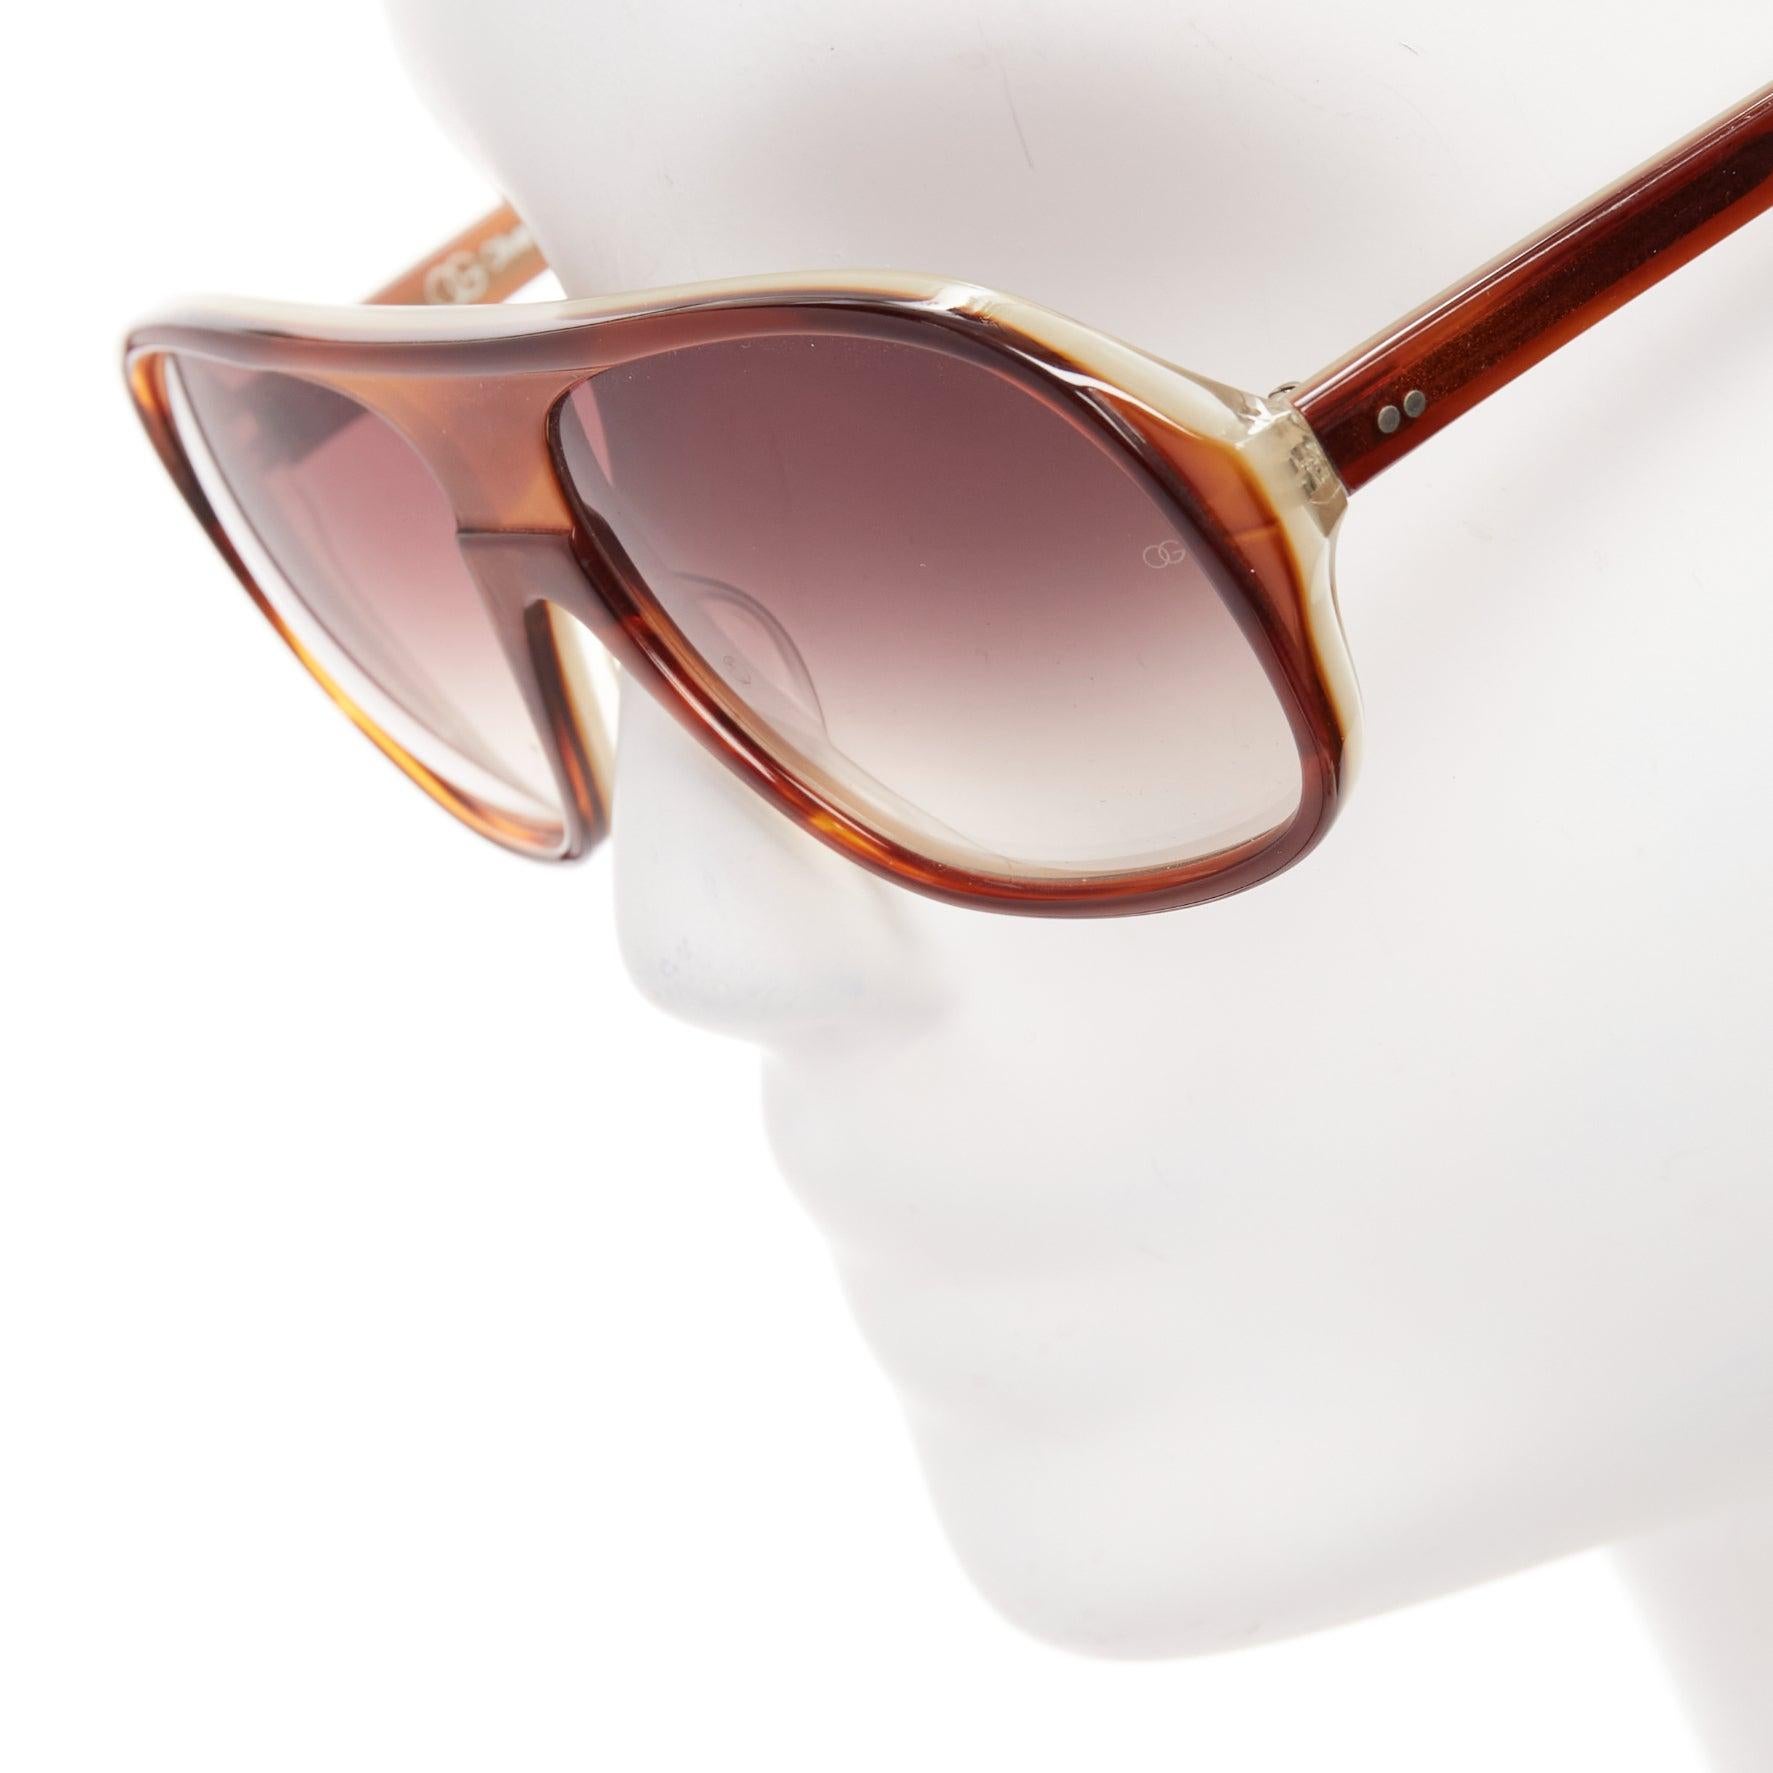 OLIVIER GOLDSMITH Carl dark butterscotch brown aviator sunglasses
Reference: AAWC/A01010
Brand: Olivier Goldsmith
Model: Carl
Material: Acetate
Color: Brown
Pattern: Solid
Lining: Brown Acetate
Extra Details: Side studsand OG logo on